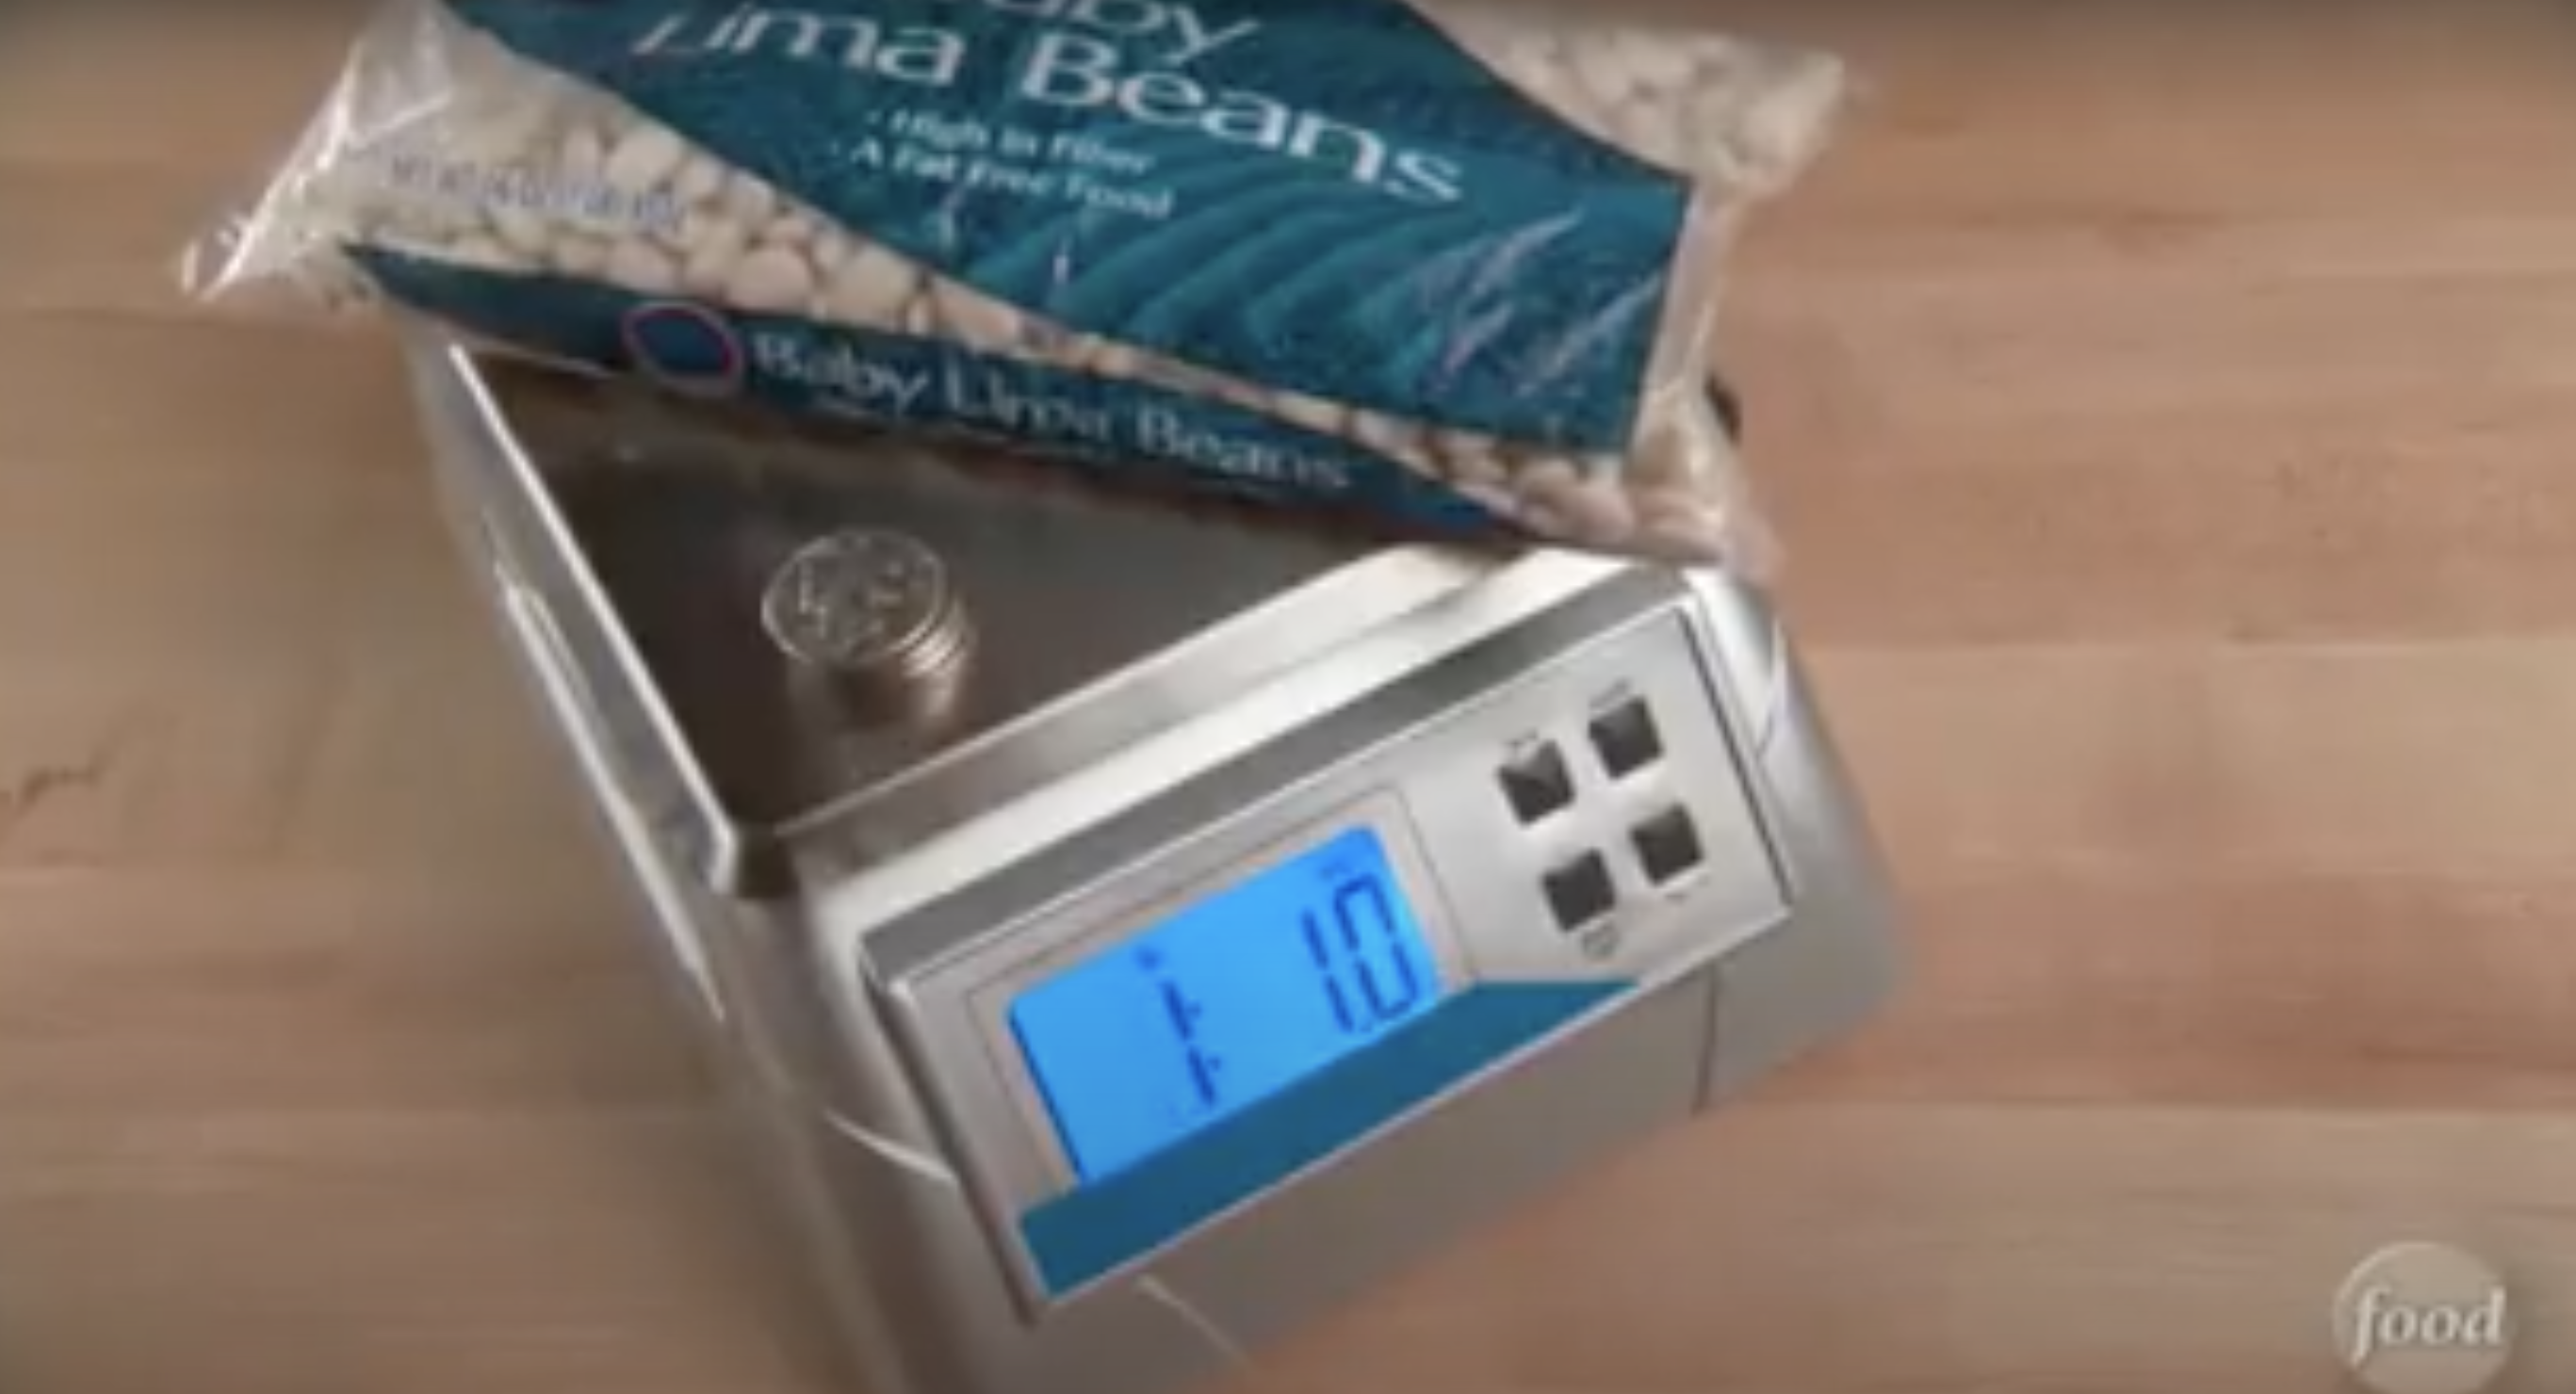 A bag of lima beans on a kitchen scale